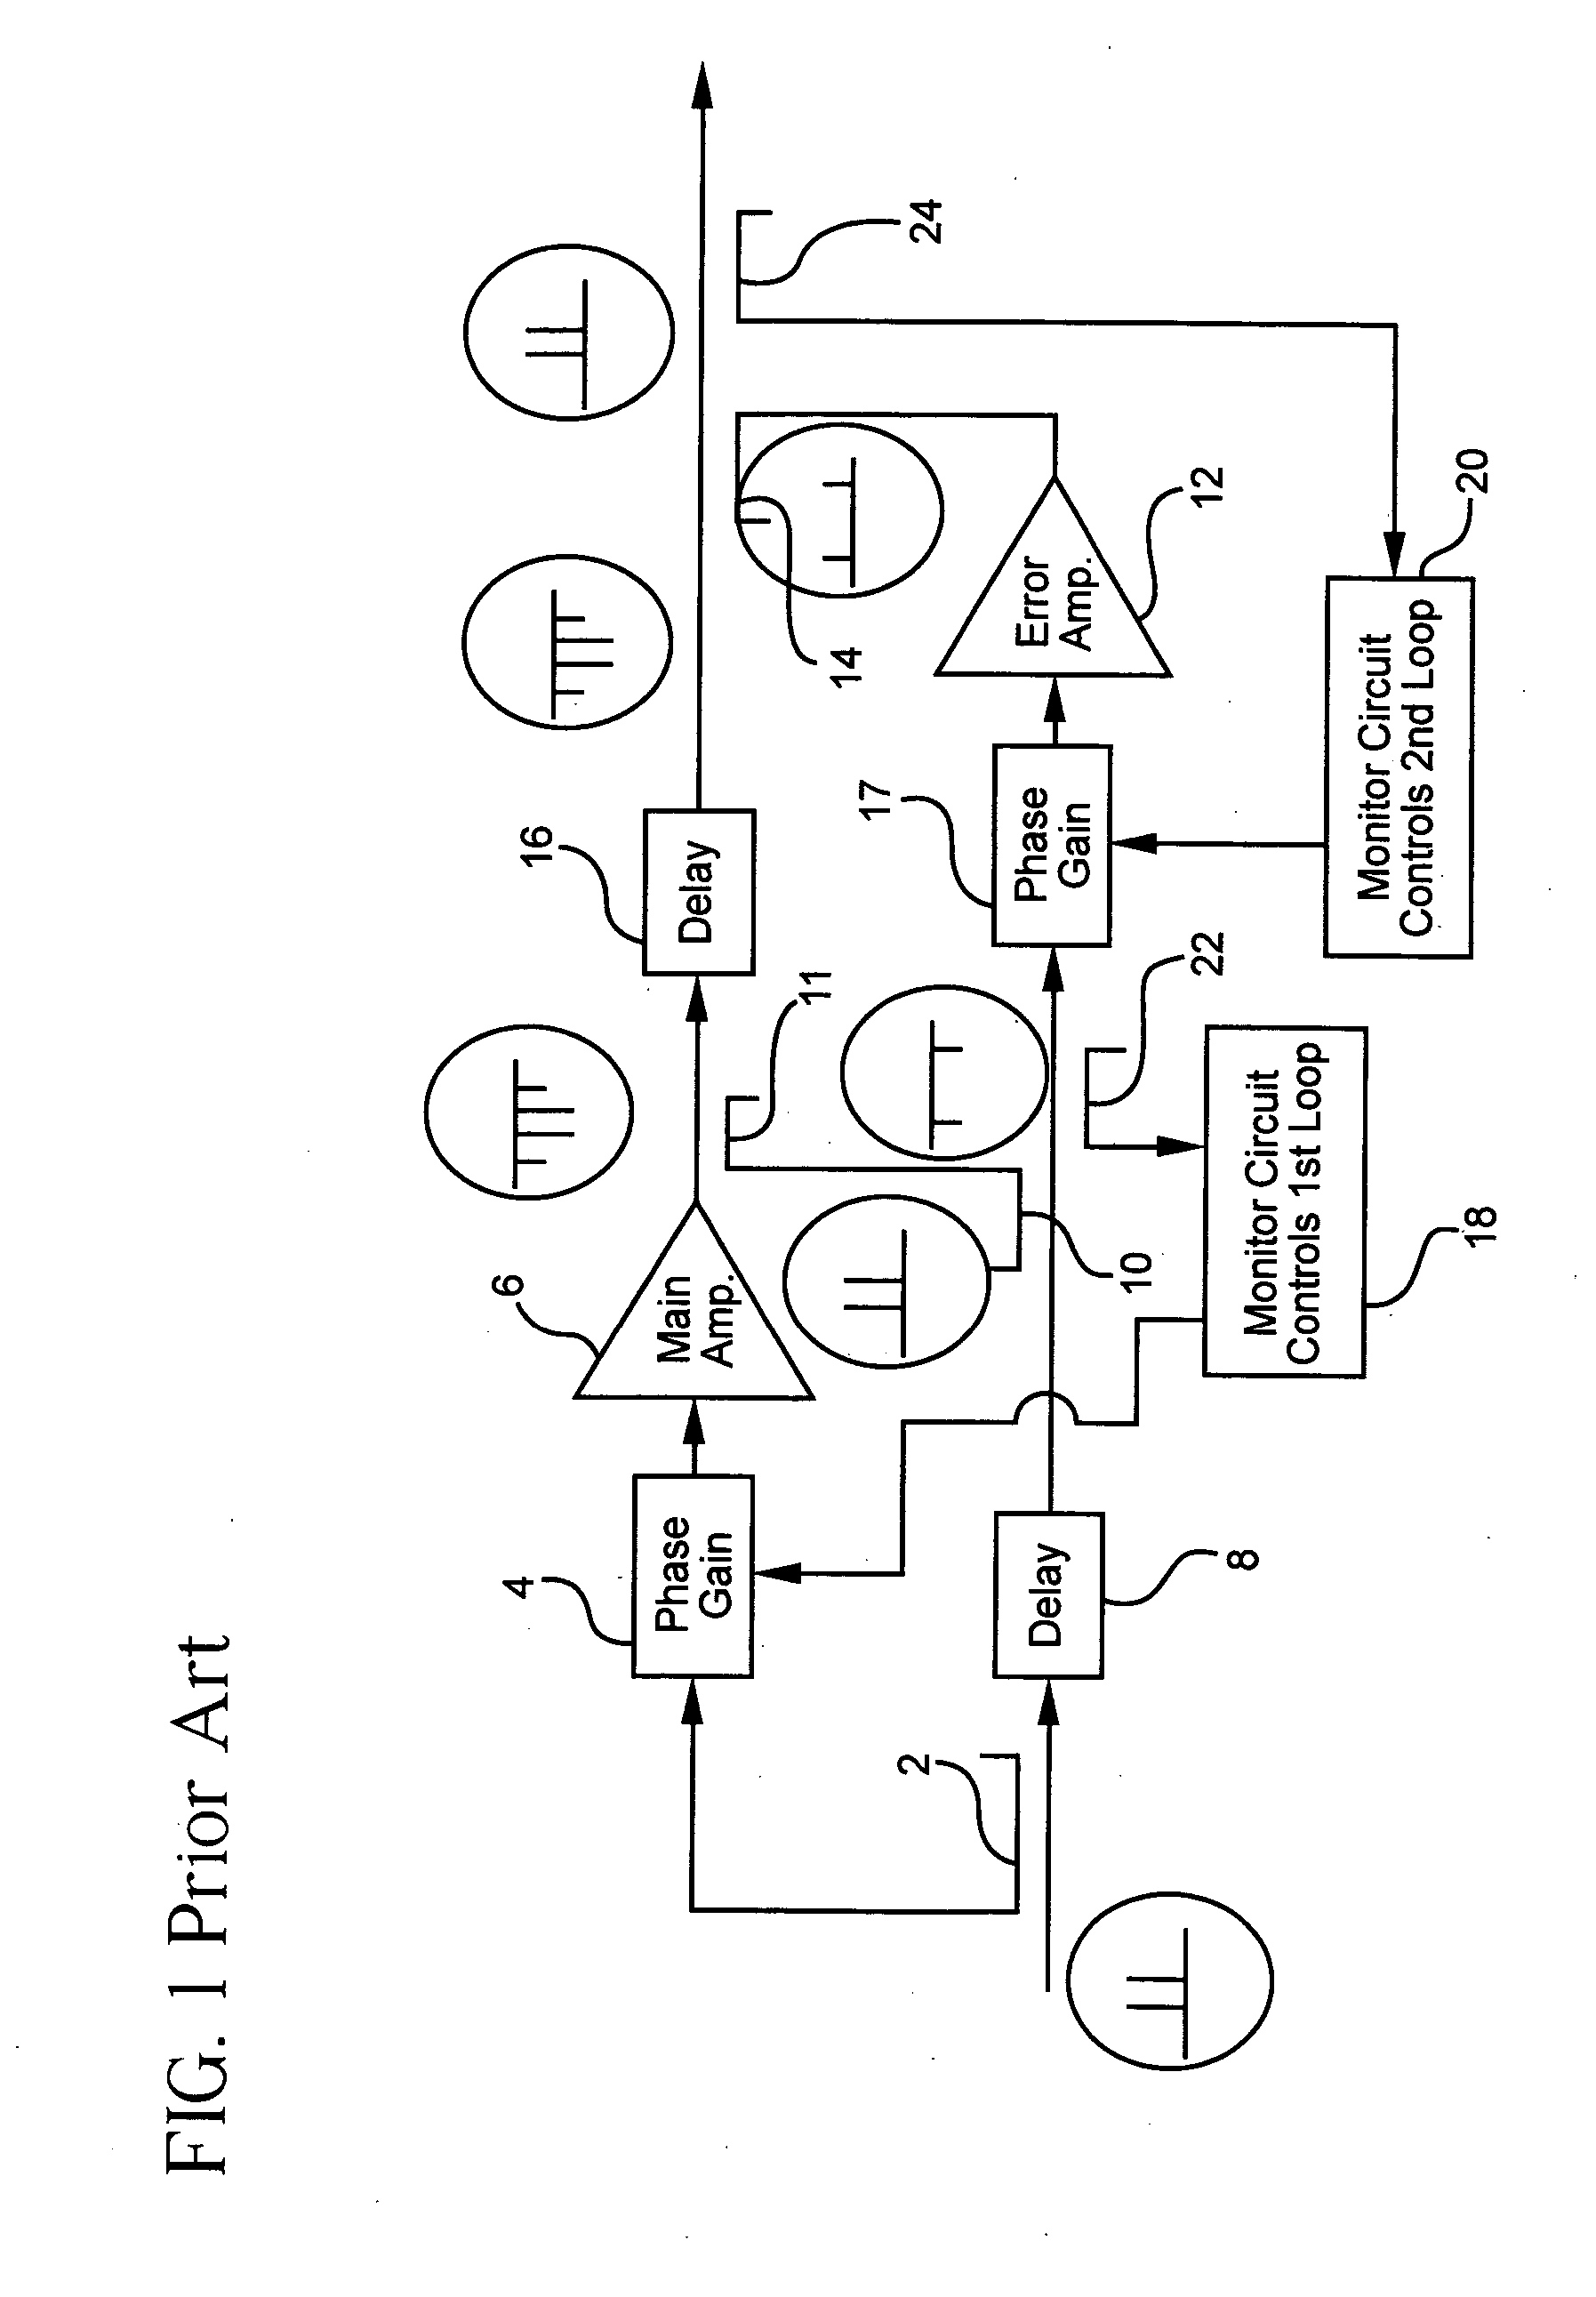 Digital signal processing based implementation of a feed forward amplifier